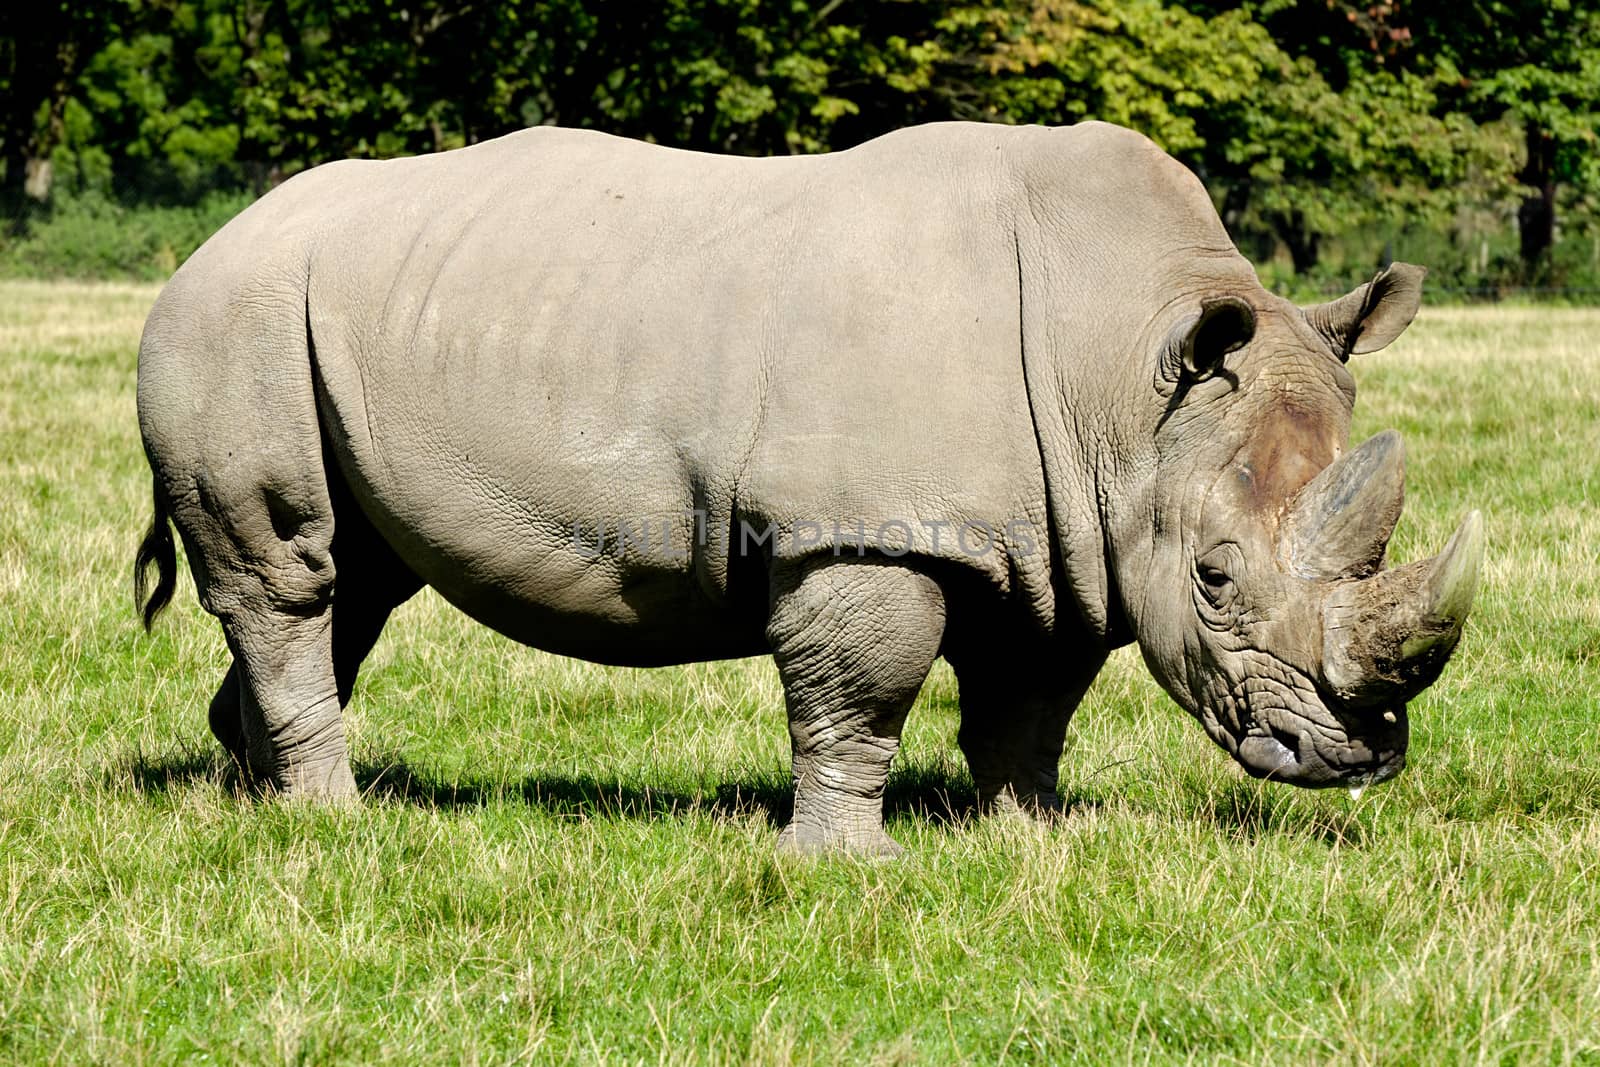 Rhino is standing and looking on green grass